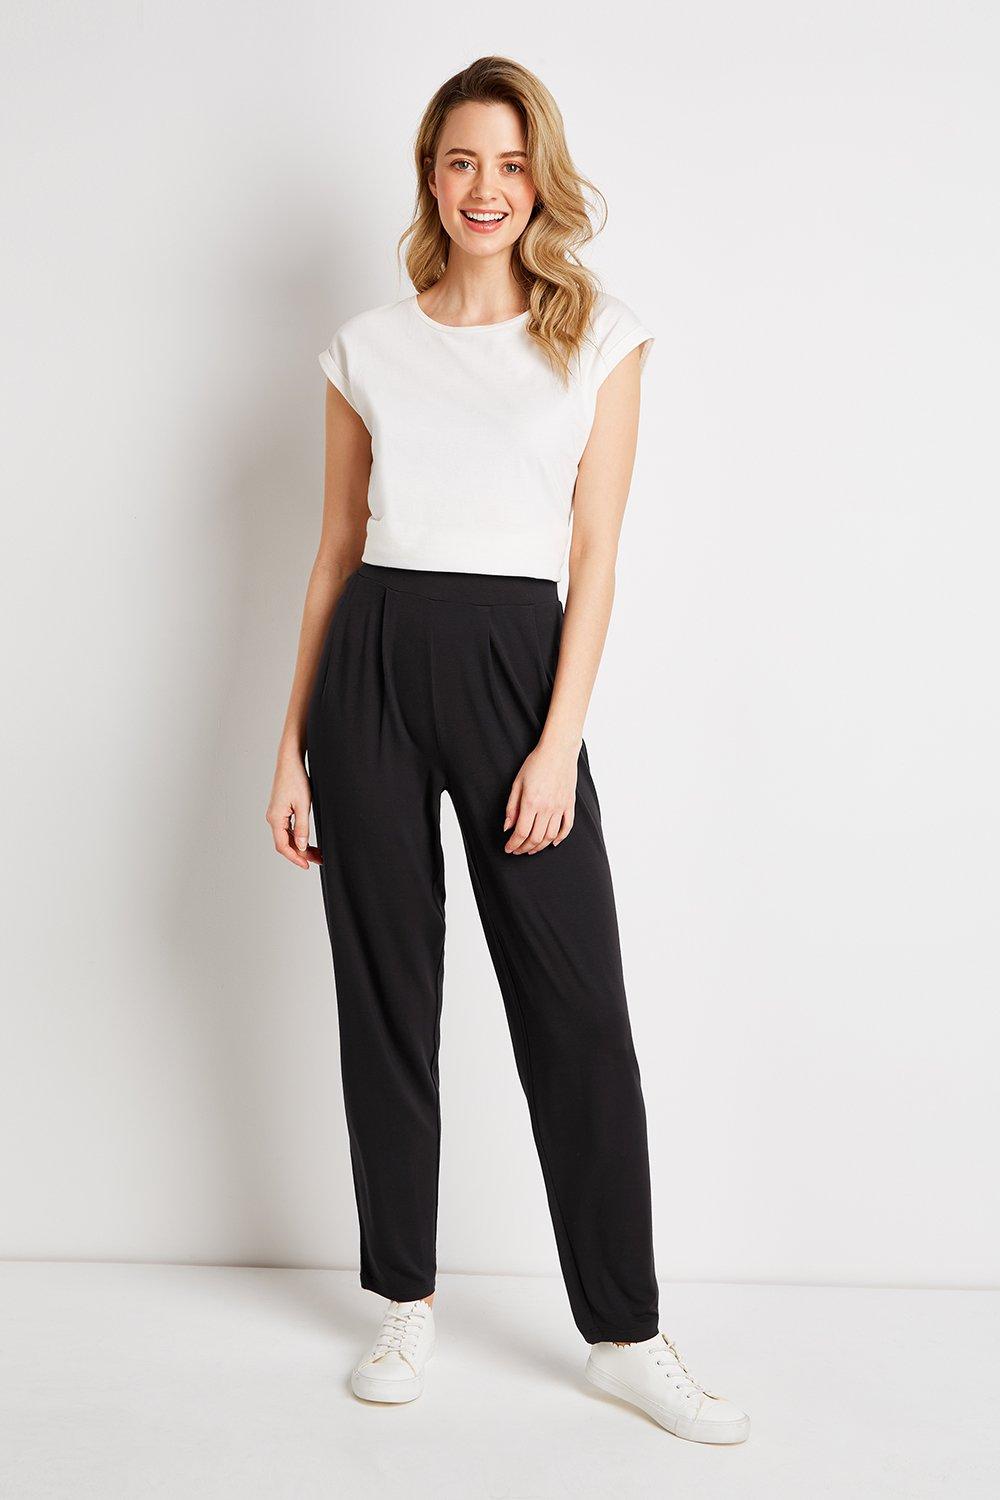 These Versatile Trousers Are A Must-Have For Your Work To Weekend Wardrobe. A Cosy Jersey Fabric Combined With A Flattering Tapered Leg And Classic Navy Hue Make These A Wardrobe Staple. &Nbsp; Tall Trousers Are An Extra 5Cm In Length  Trousers Tapered Re